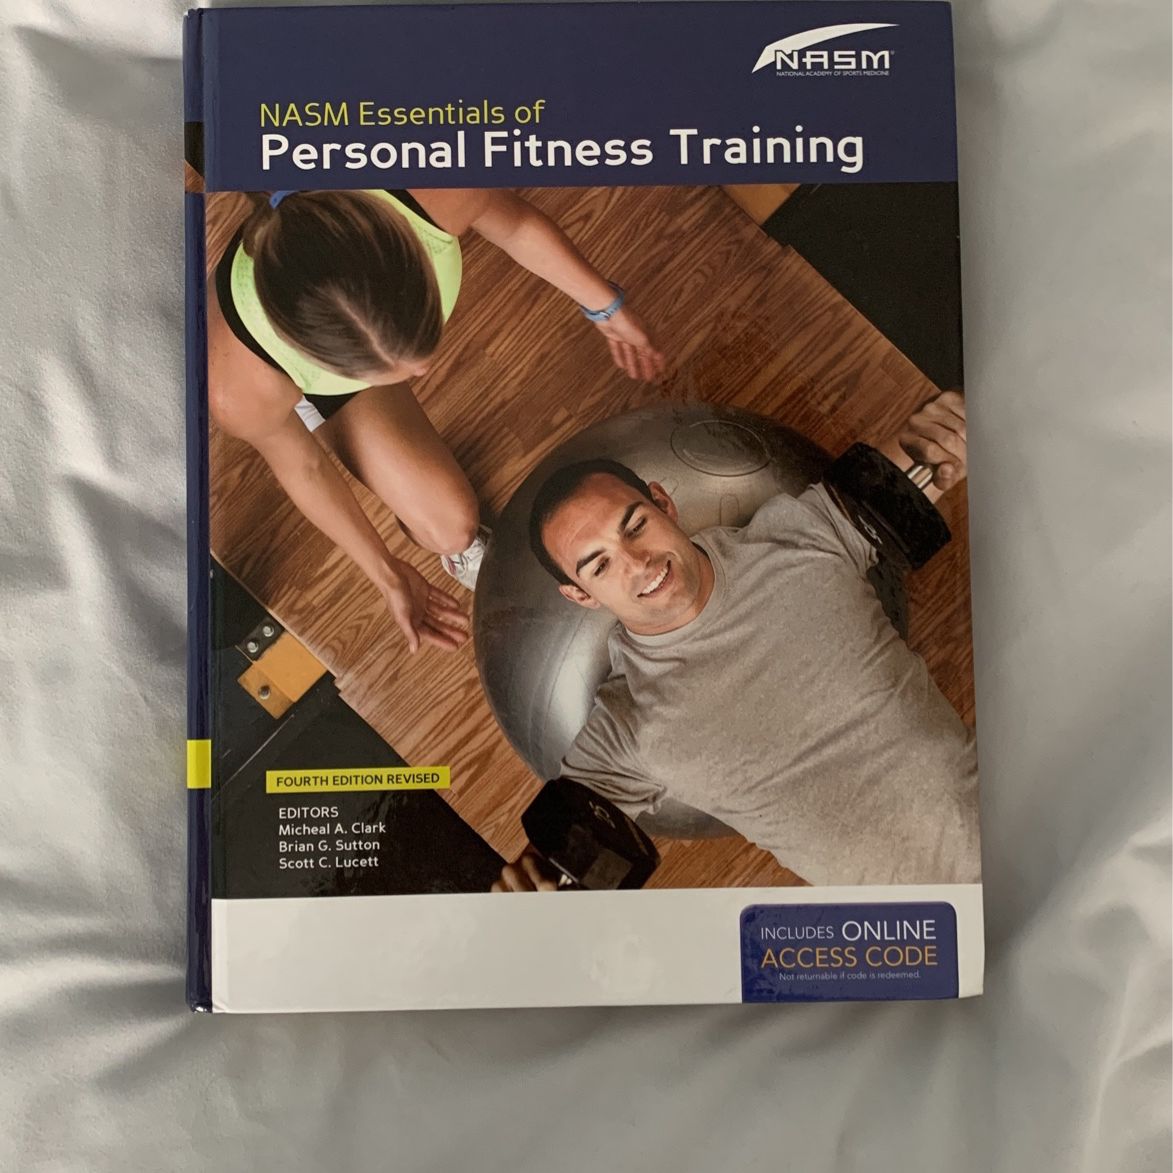 NASM Essentials of Personal Fitness Training 4th edition revised